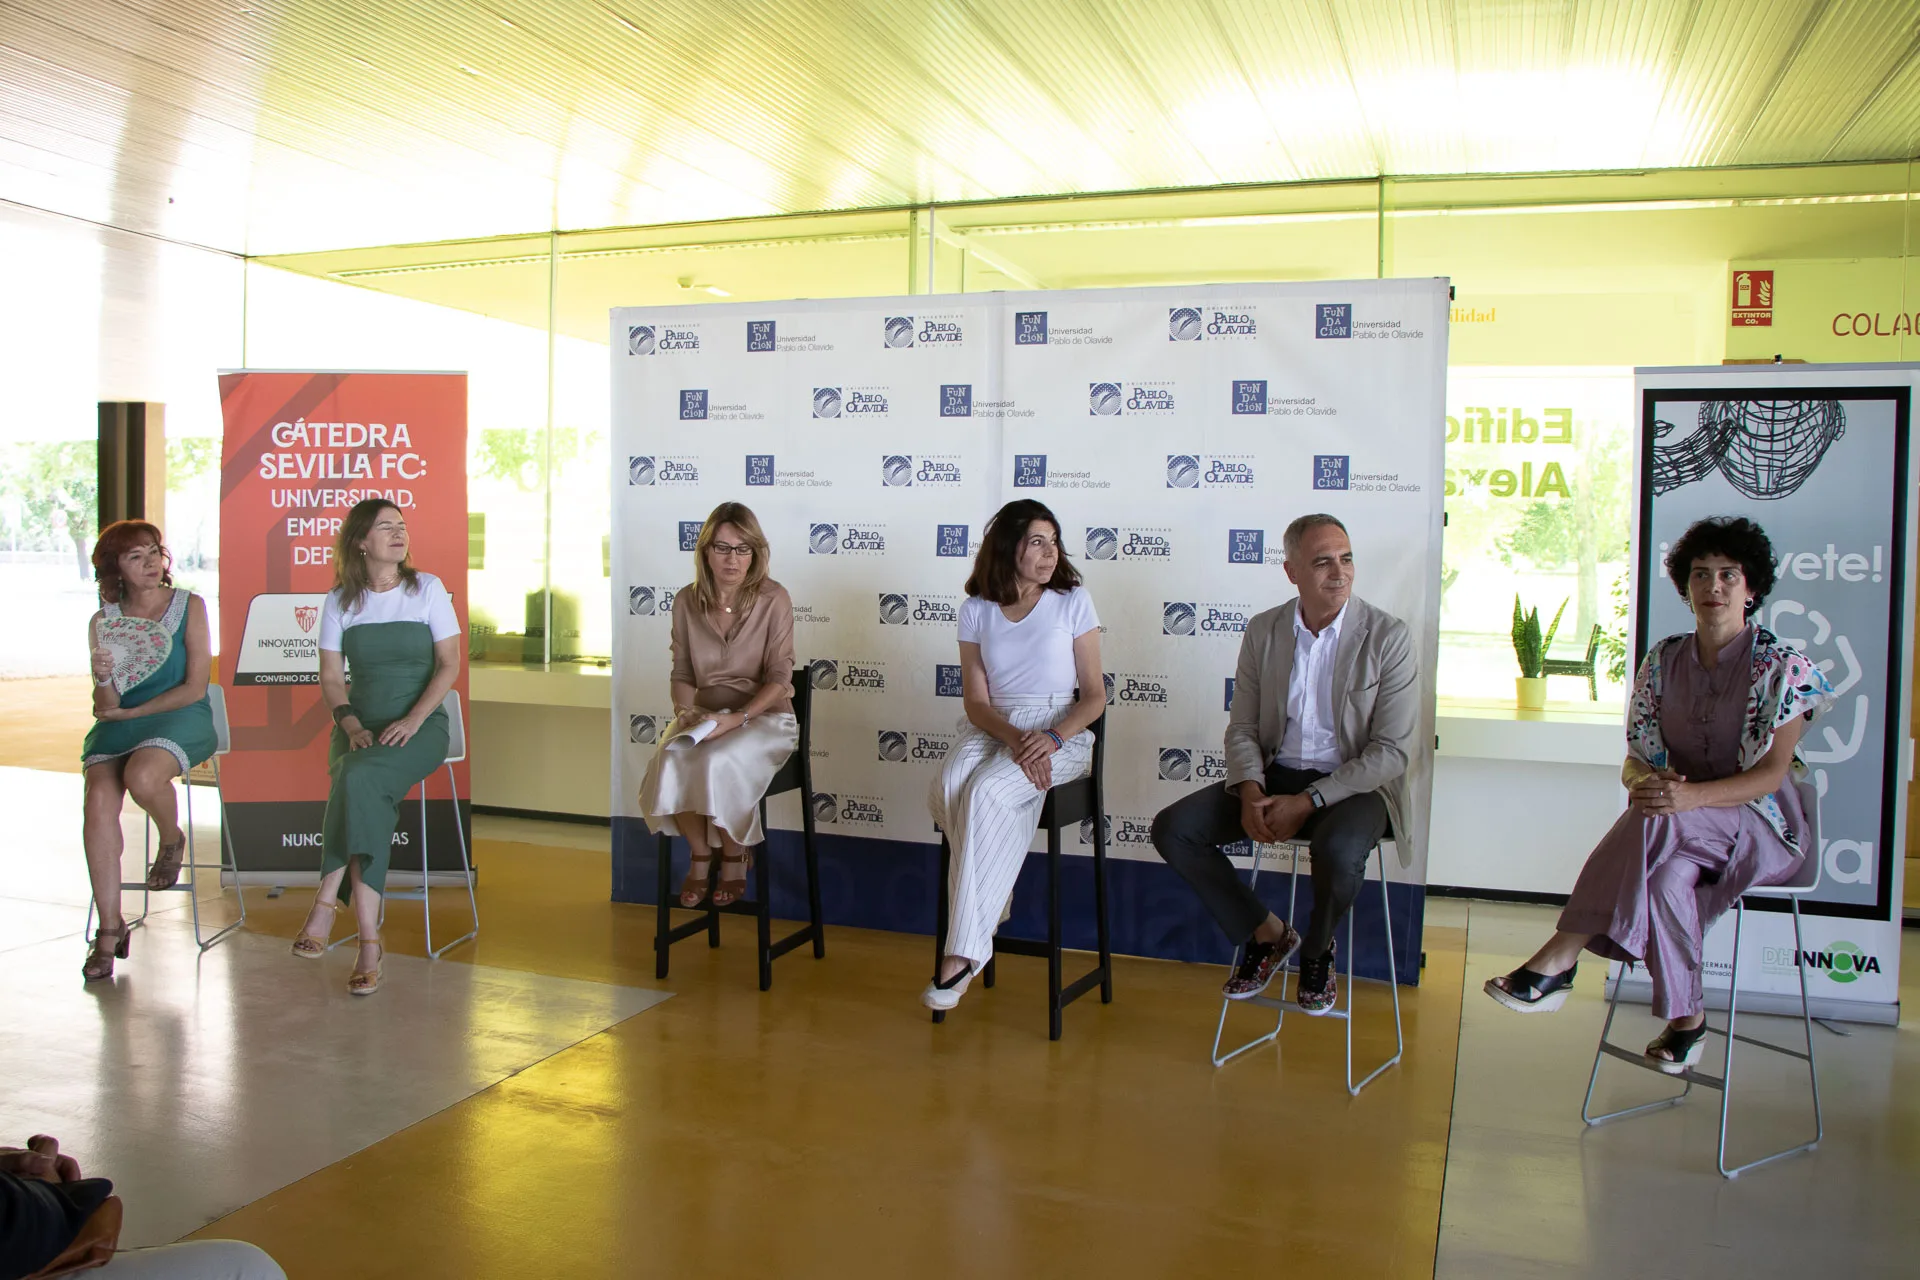 The Sevilla FC Innovation Center sponsors two entrepreneurship competitions at the UPO